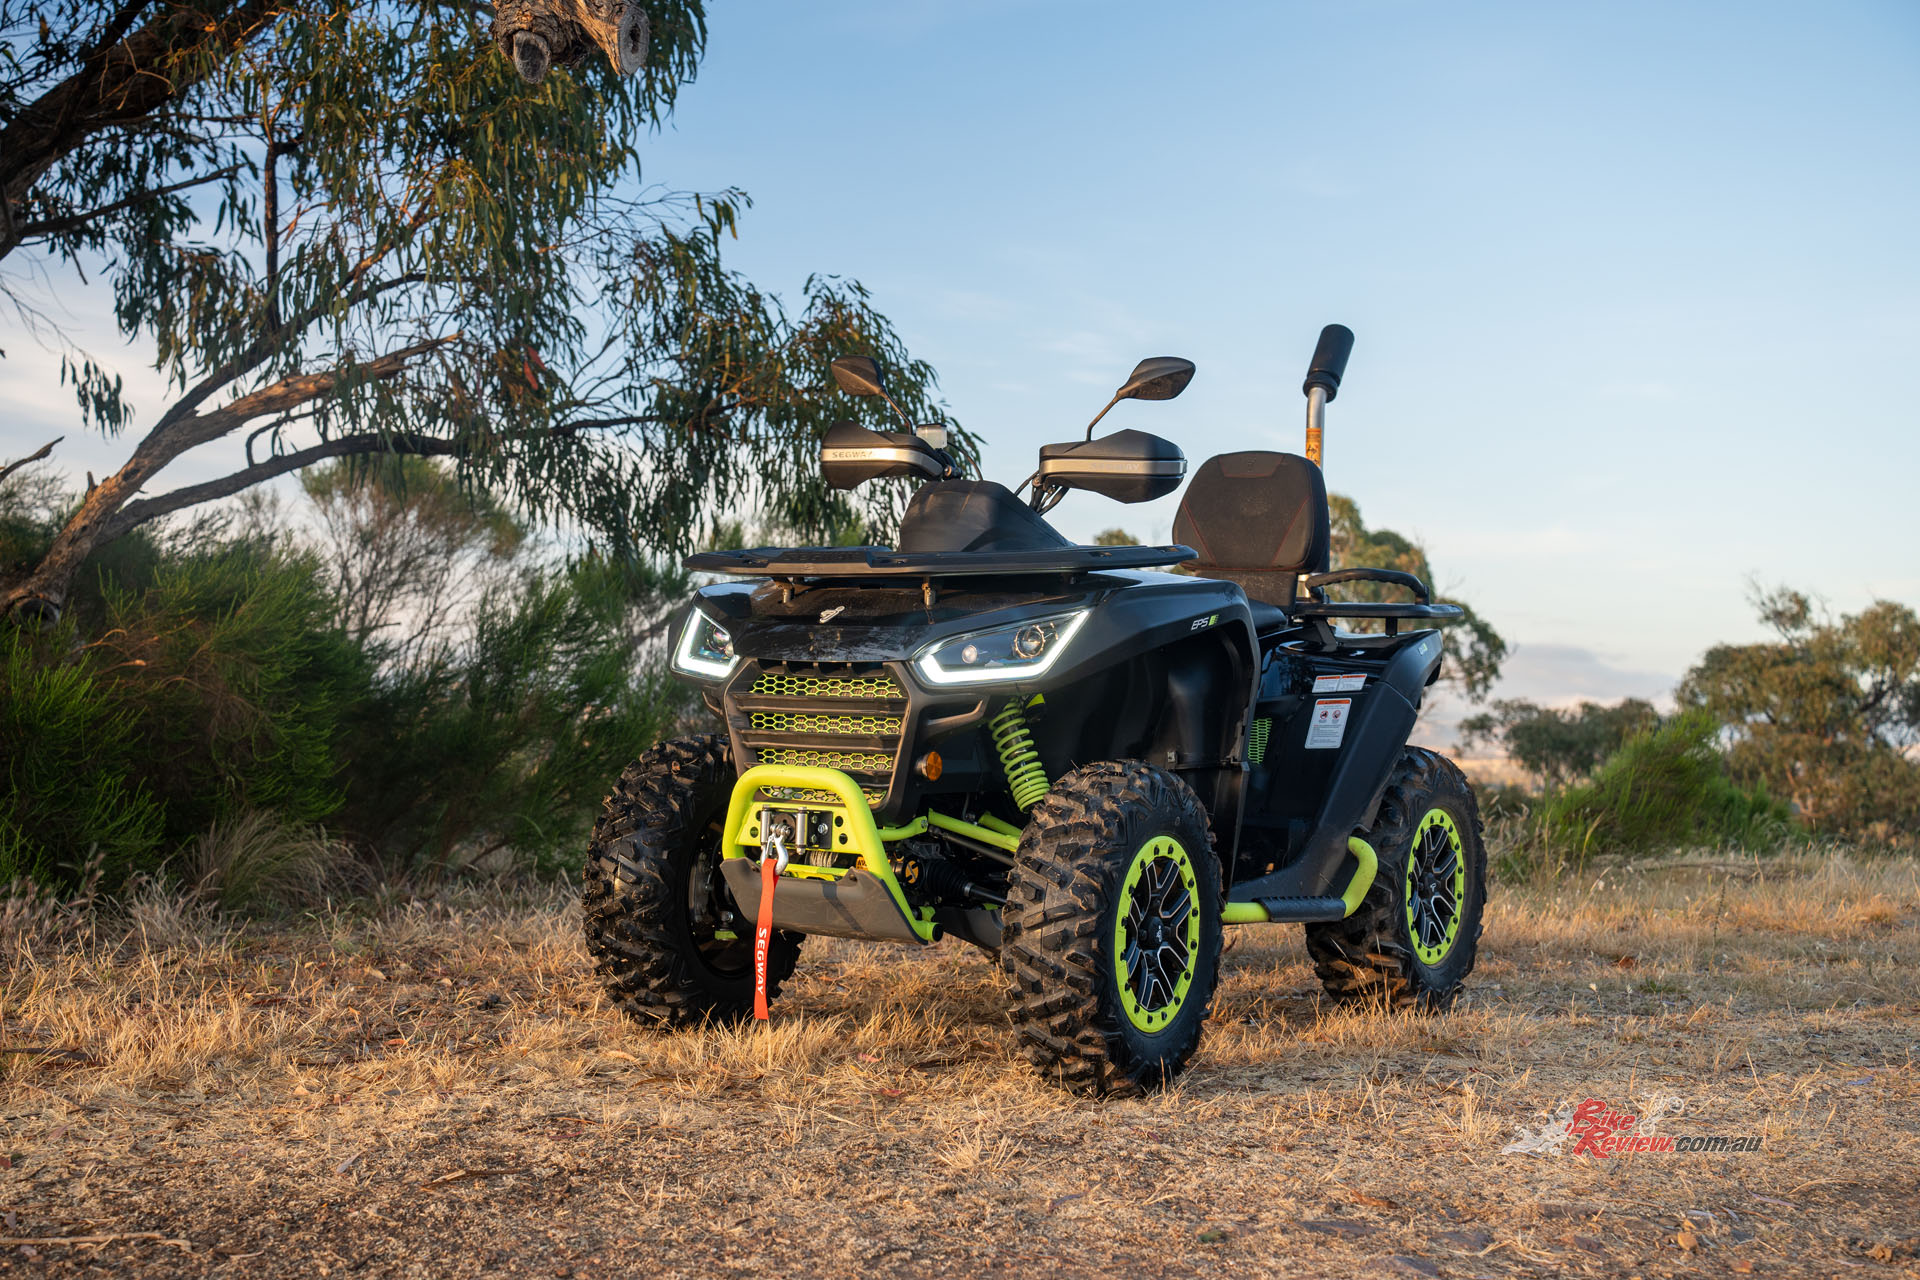 First up was the AT6 L FULL SPEC, which is the larger of the ATV’s that Segway Powersports has to offer.